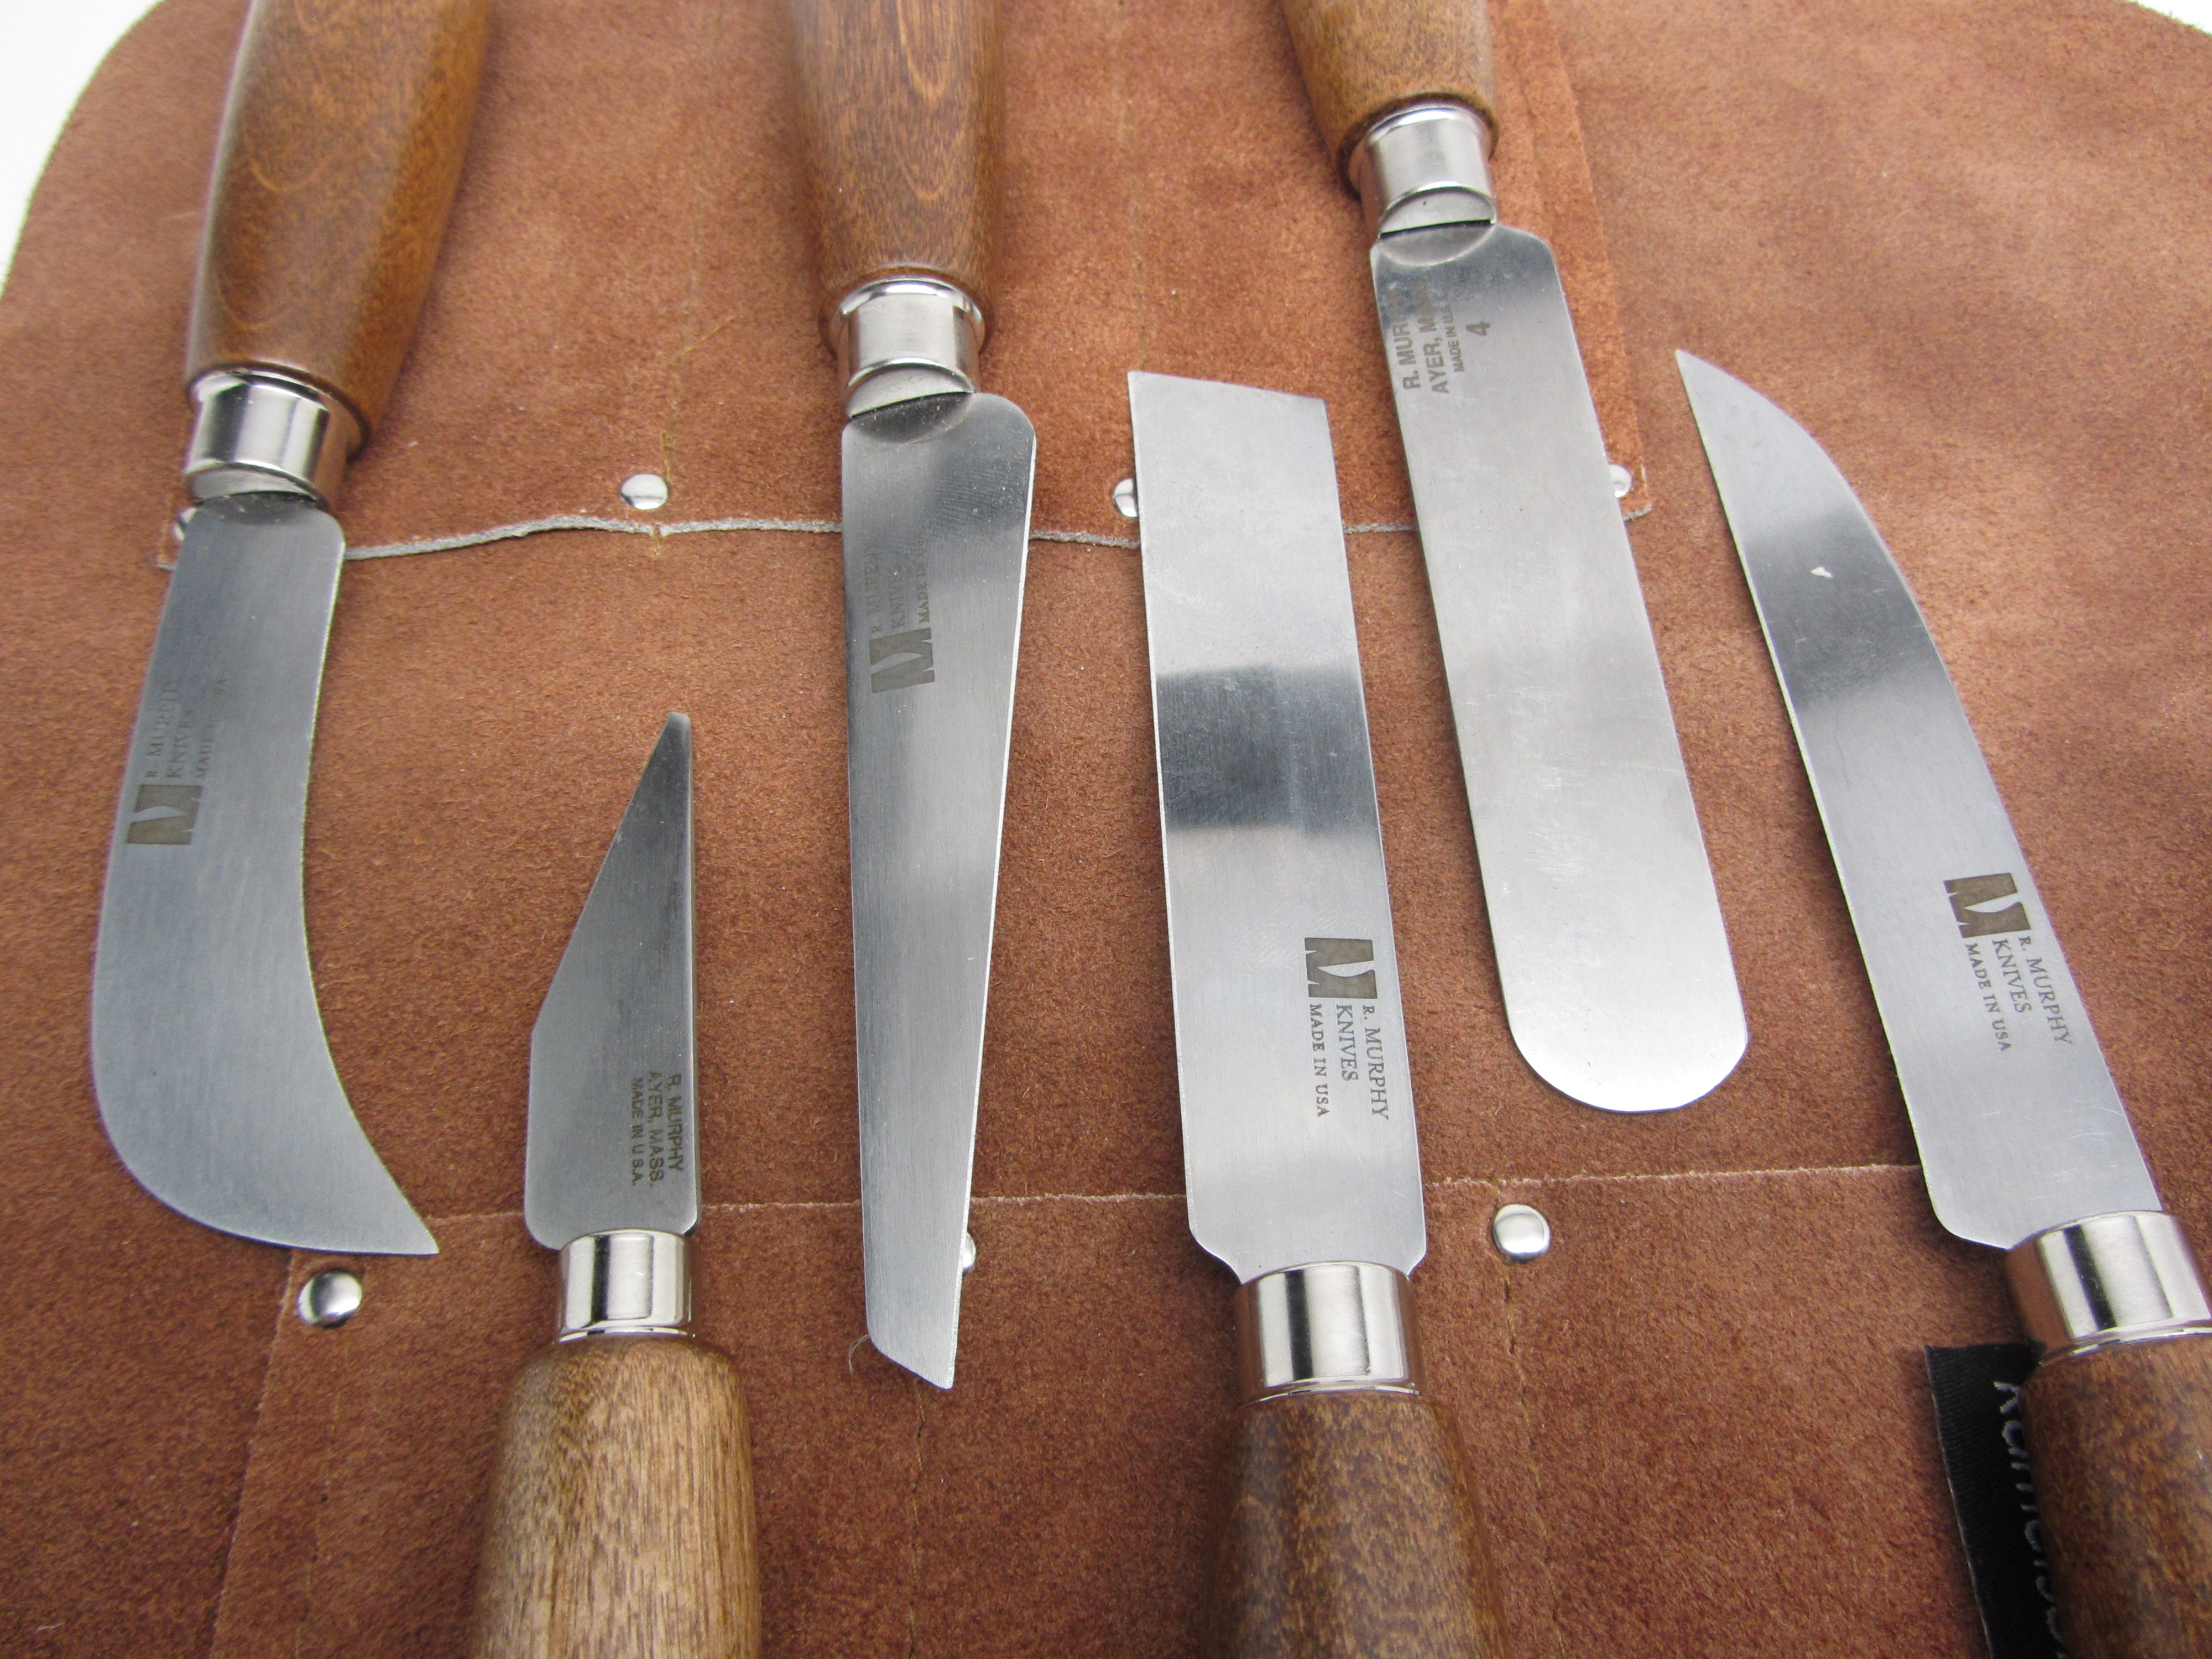 R Murphy Square Taper Wide Sharp Point McKay Shoe Makers Repair Knives 